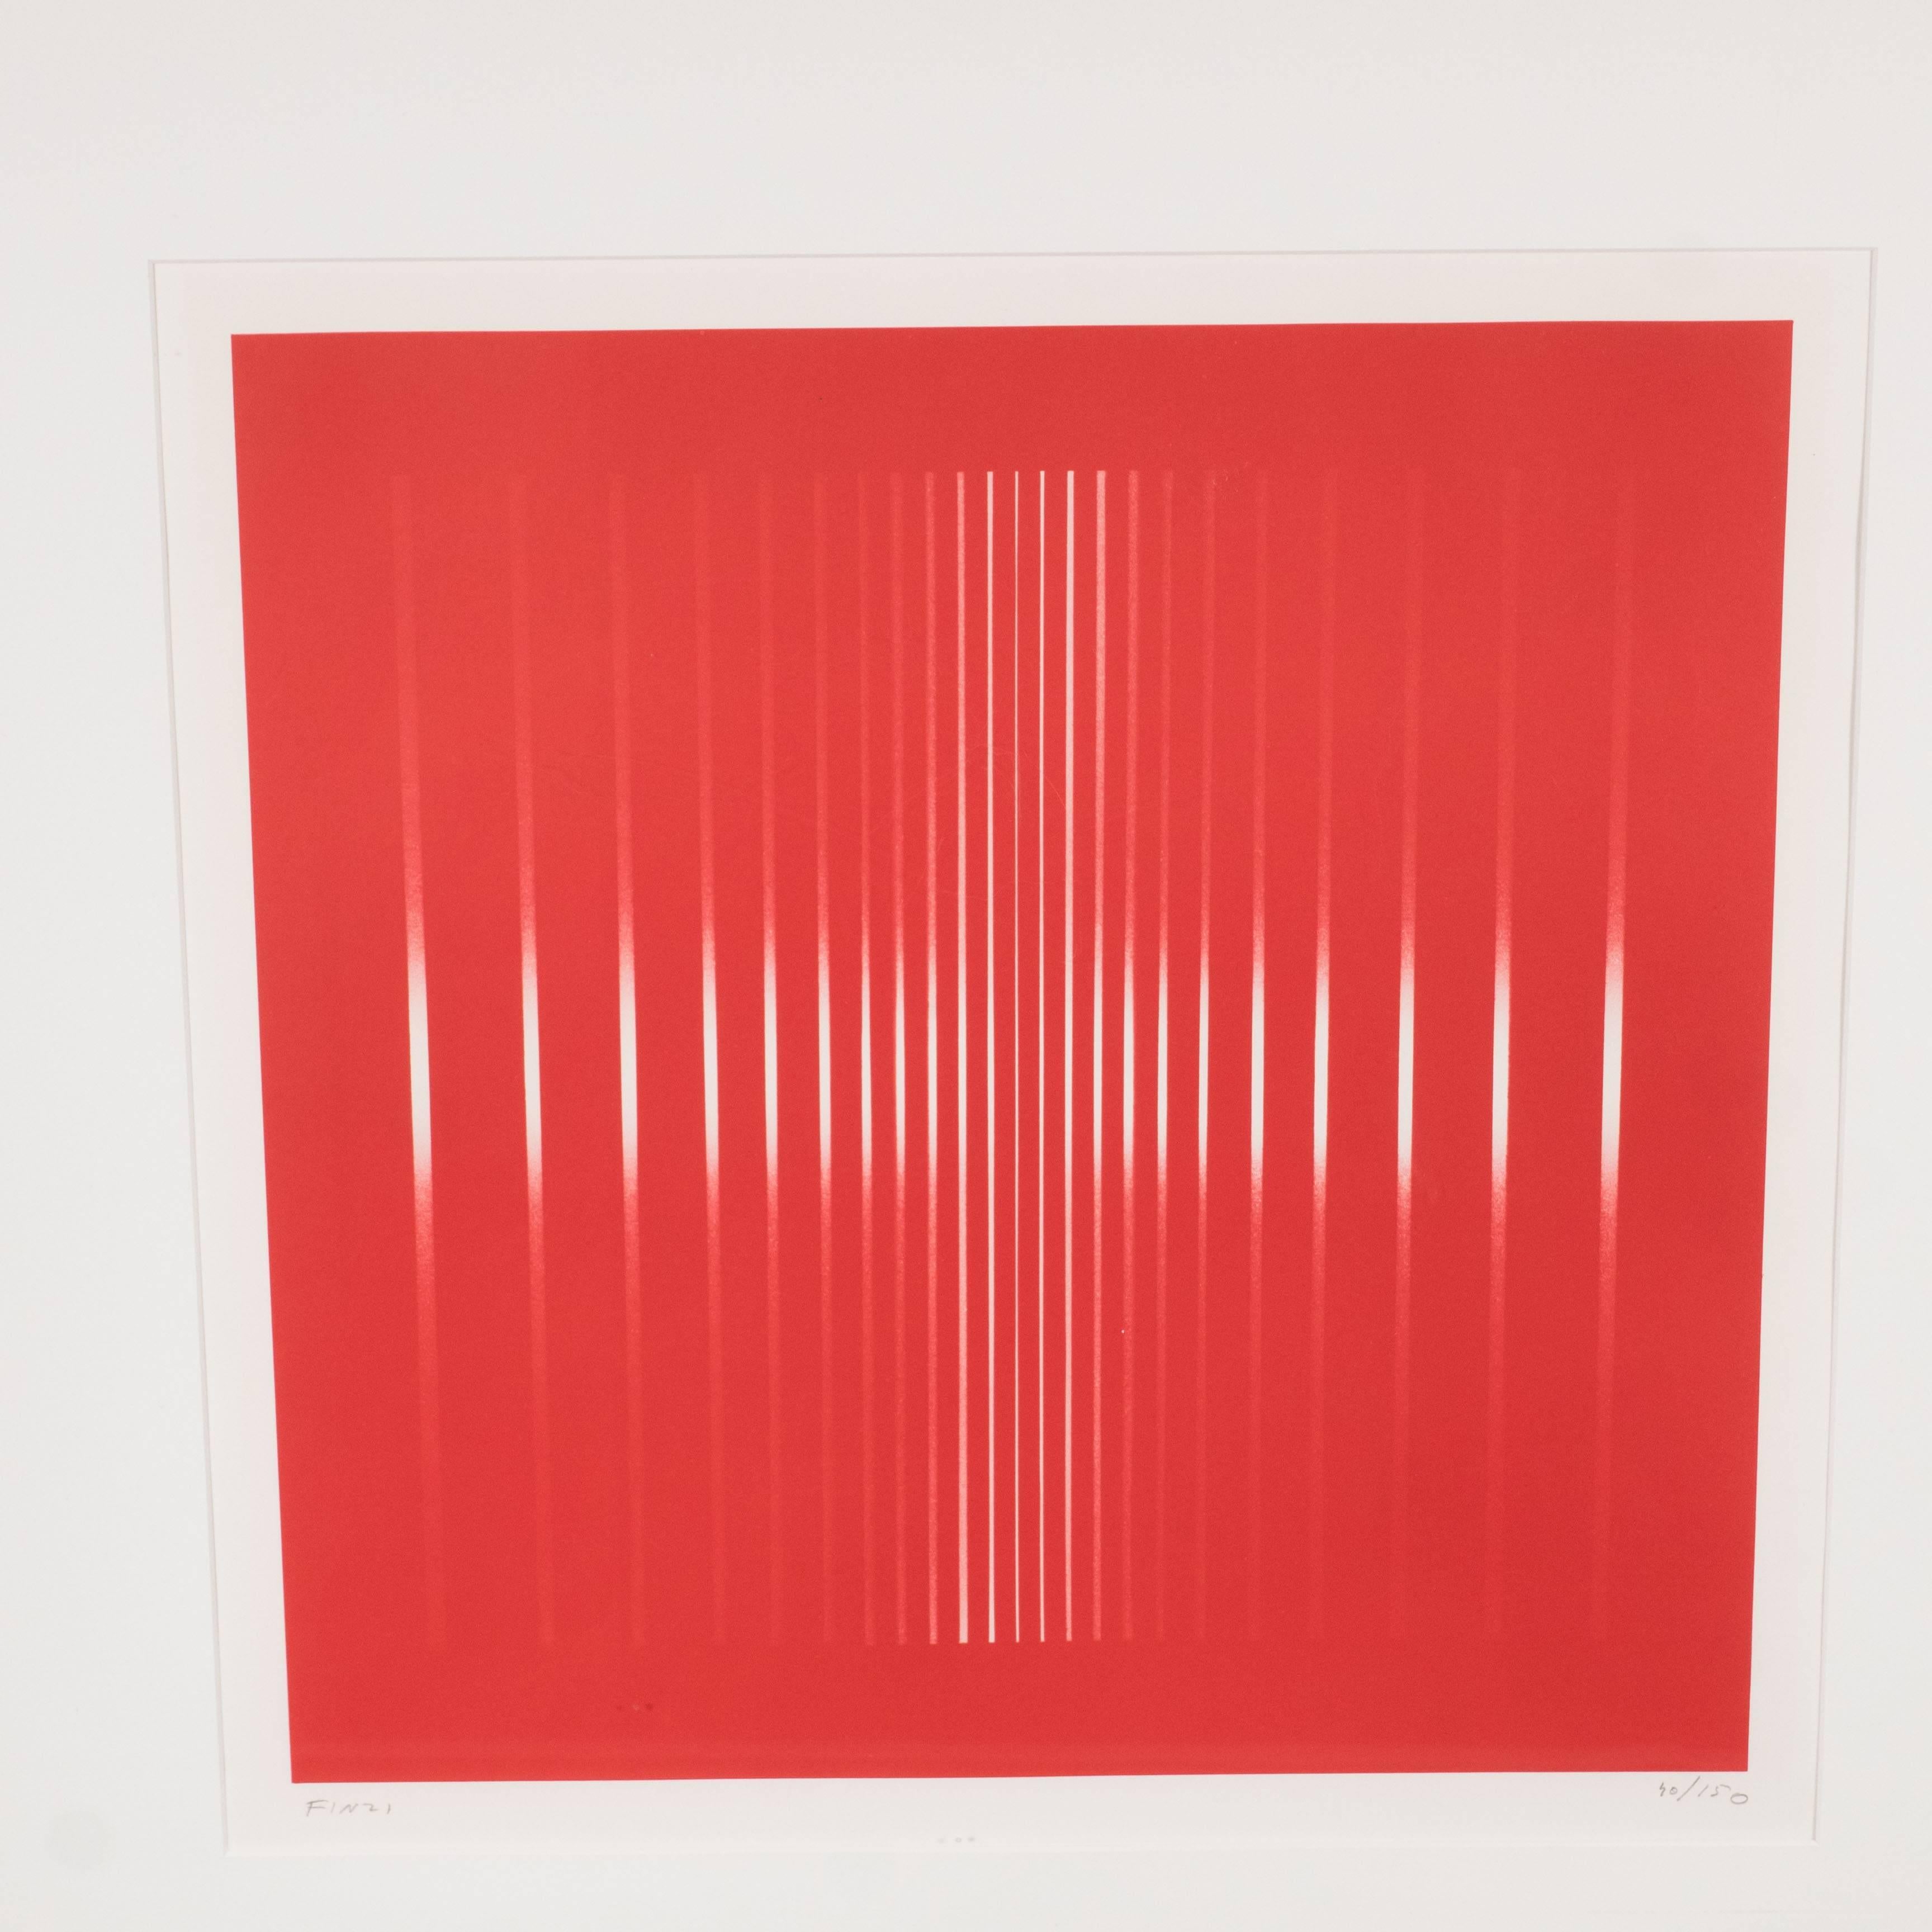 Dynamic Mid-Century Modern Op-Art Signed Serigraph by Ennio Finzi in Vibrant Red 1